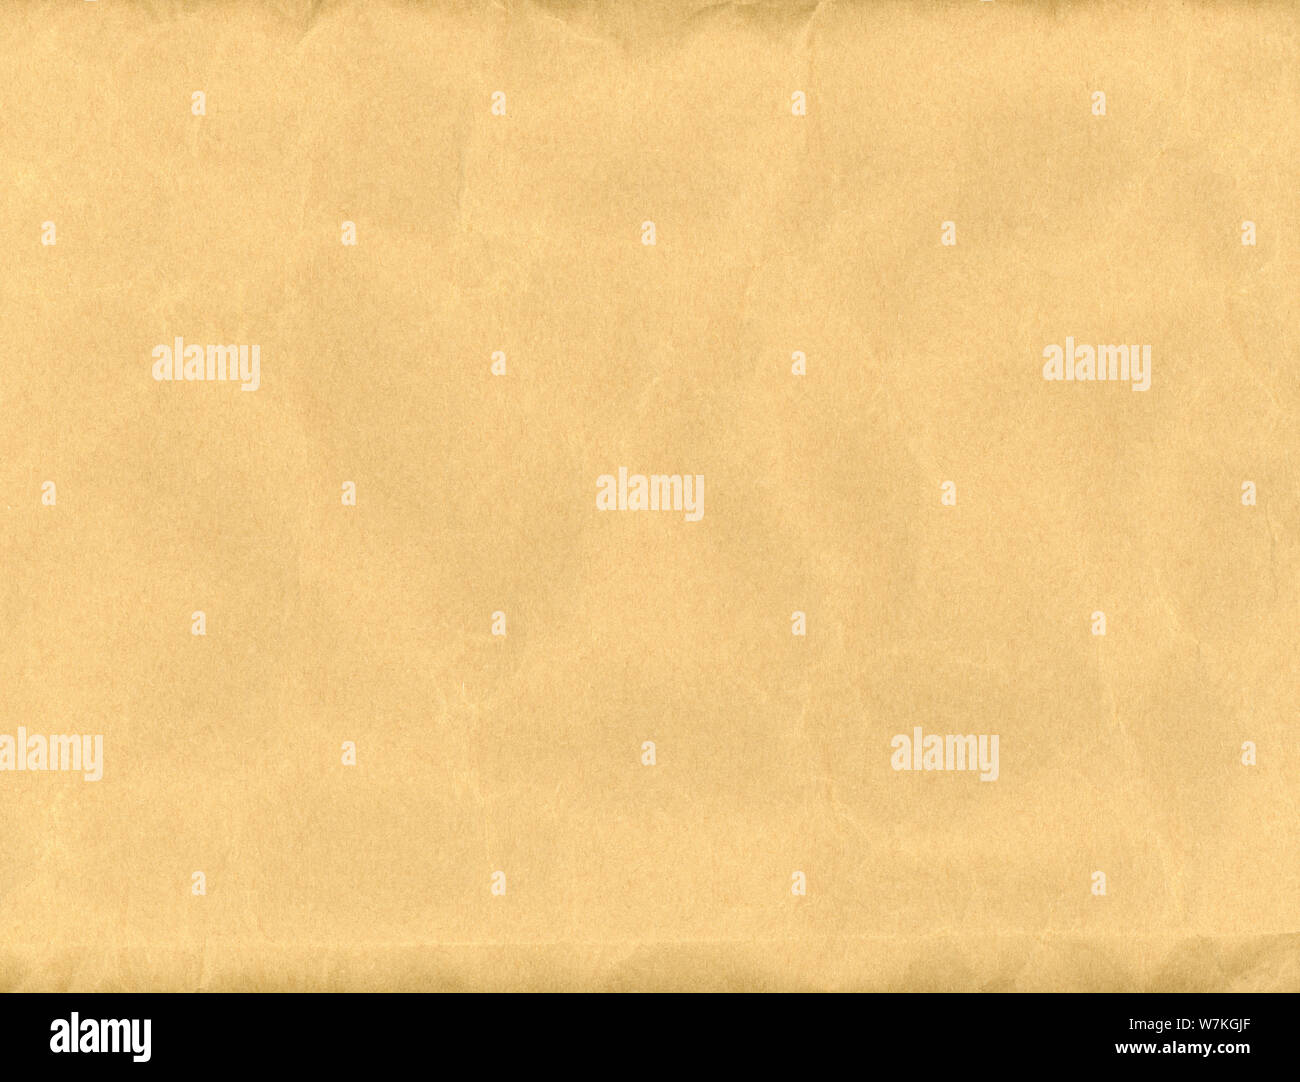 24 Free Seamless Paper Texture in High Res – Free Seamless Textures - All  rights reseved